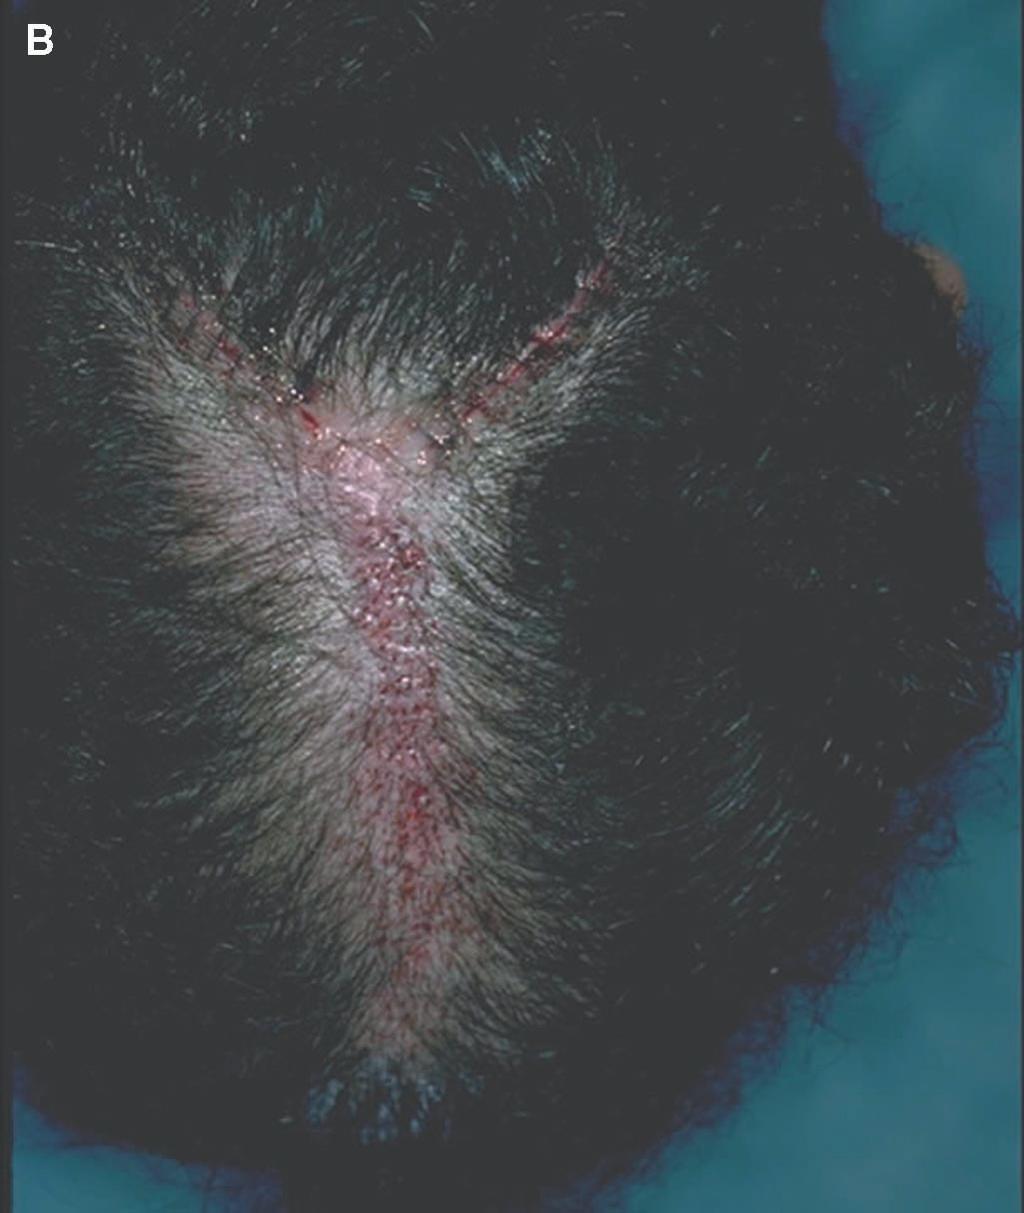 medications that interfere with healing can also result in unacceptable scars.